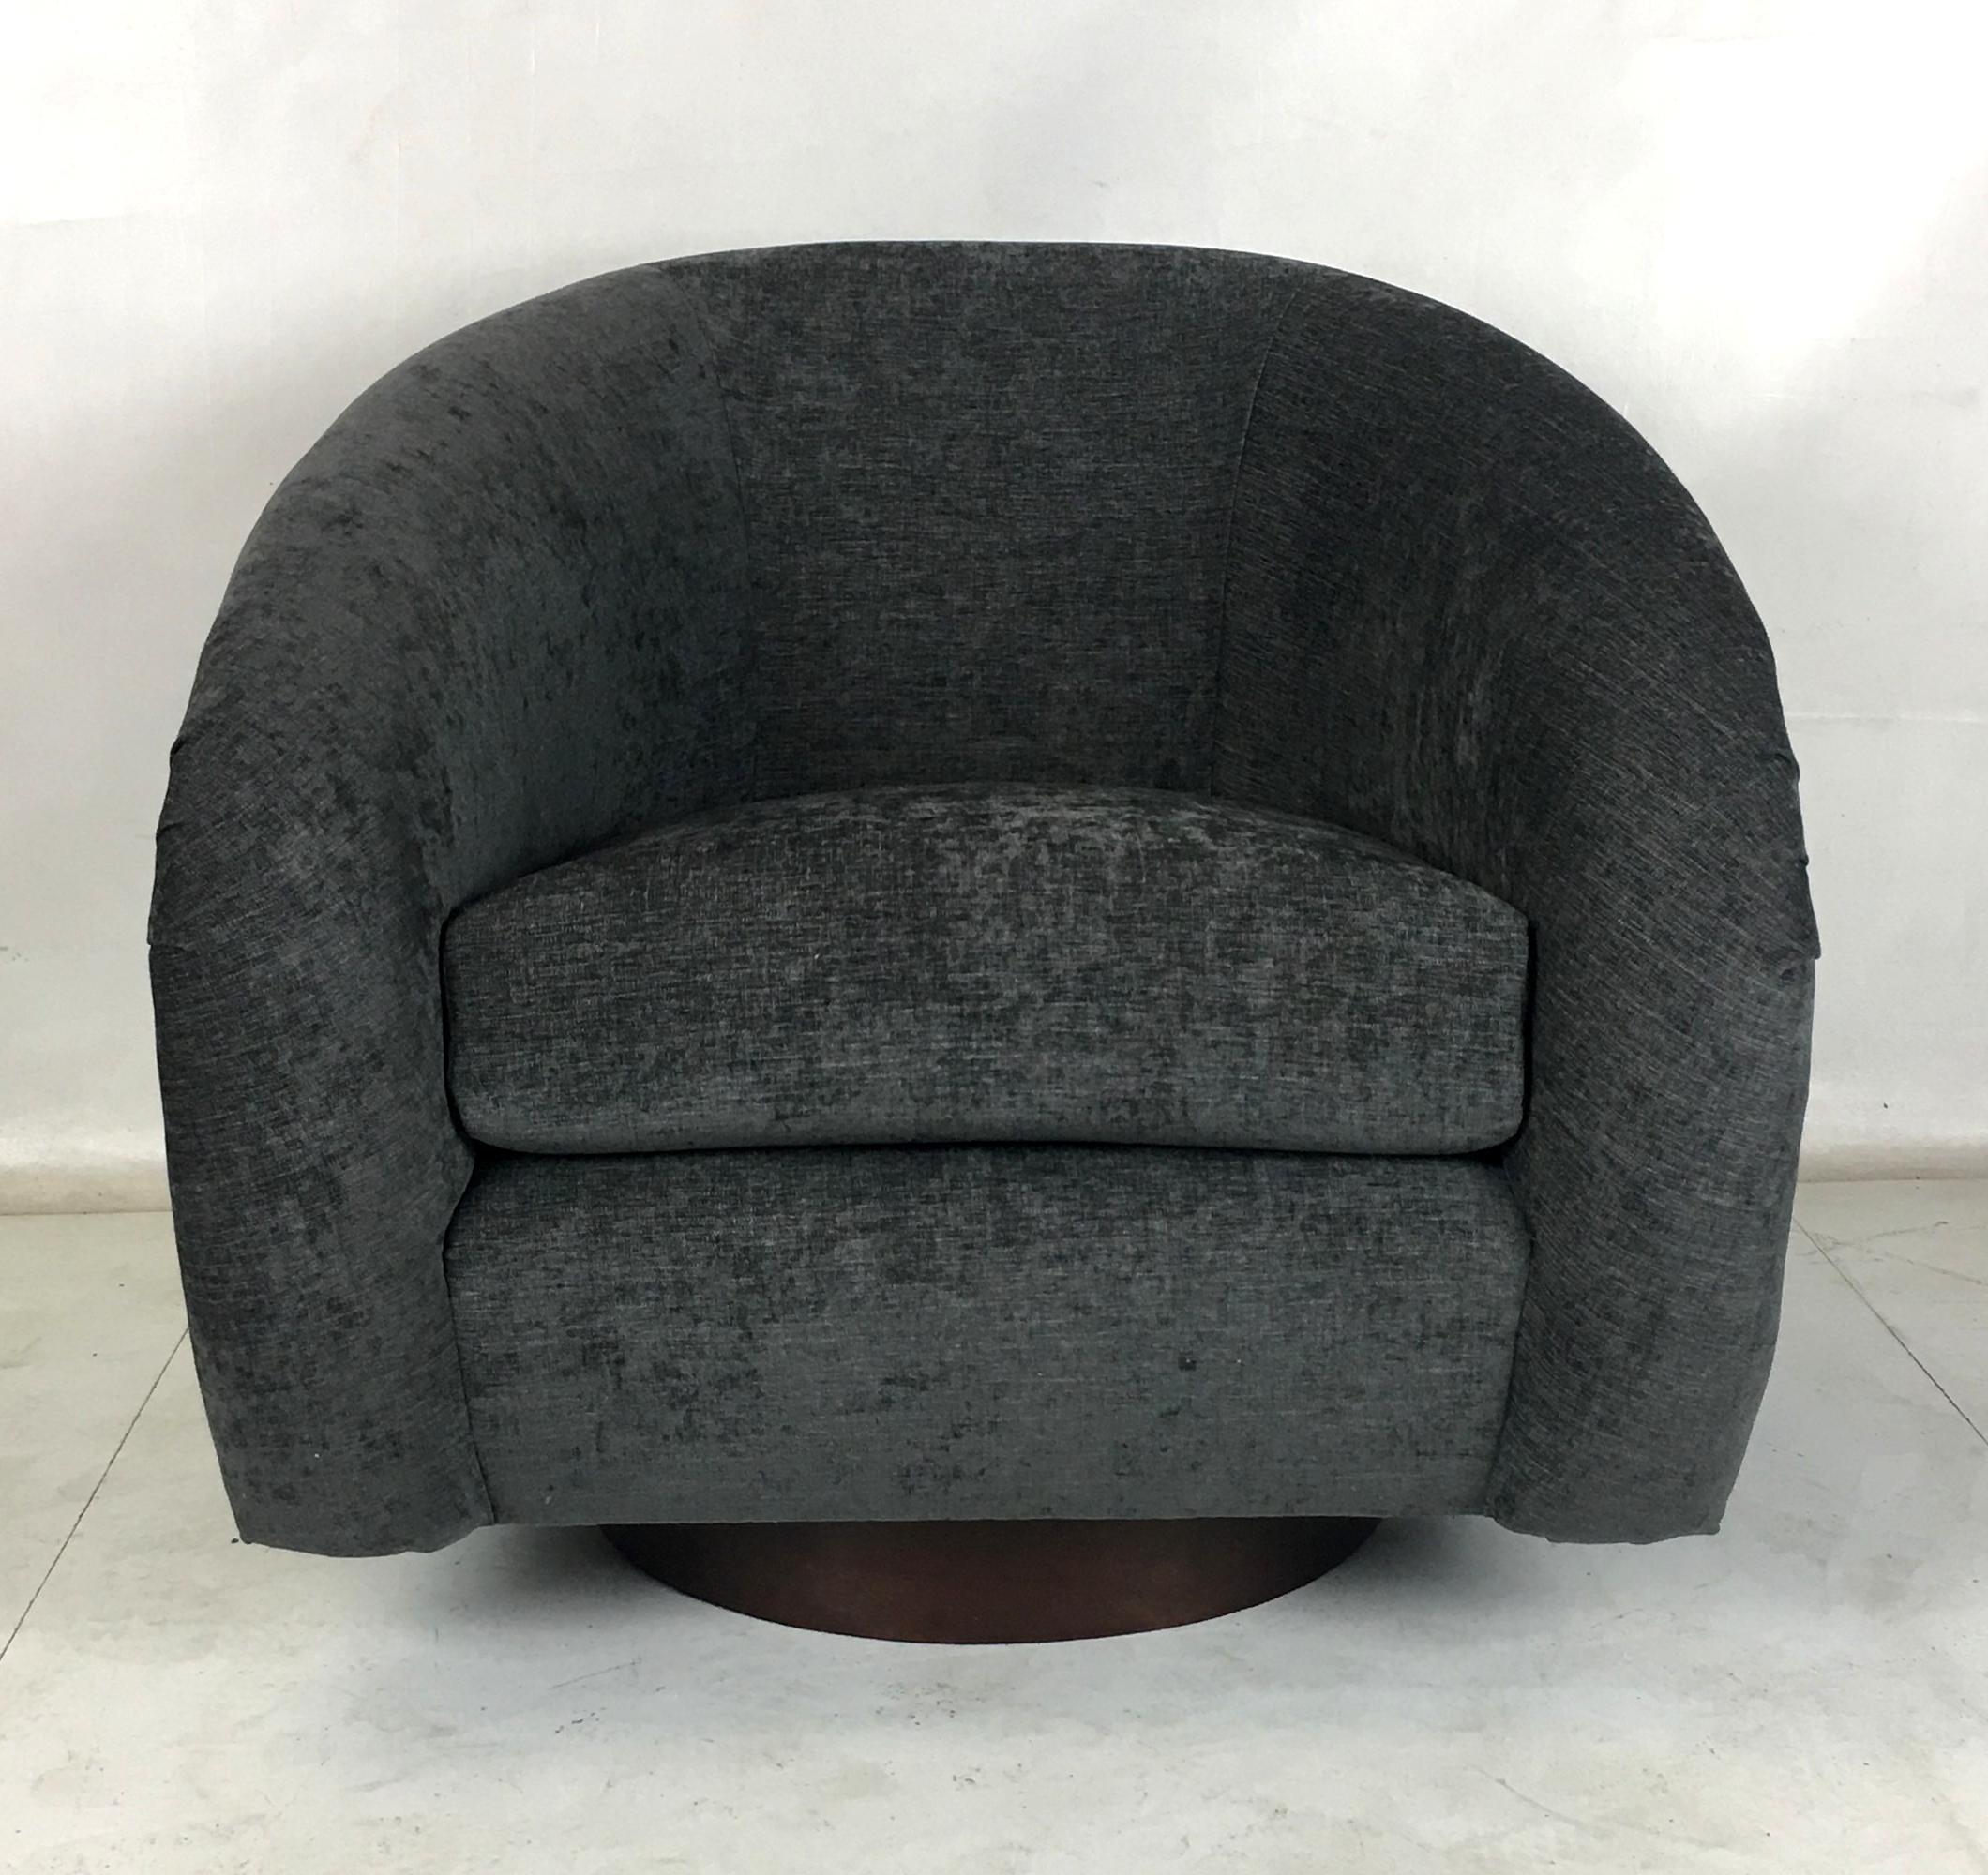 Pair of Milo Baughman roll arm swivel chairs raised on walnut veneer circular bases. The pair have been freshly upholstered in charcoal gray tweed upholstery. The bases have been refinished with new swivel plates. These chairs are luxuriously